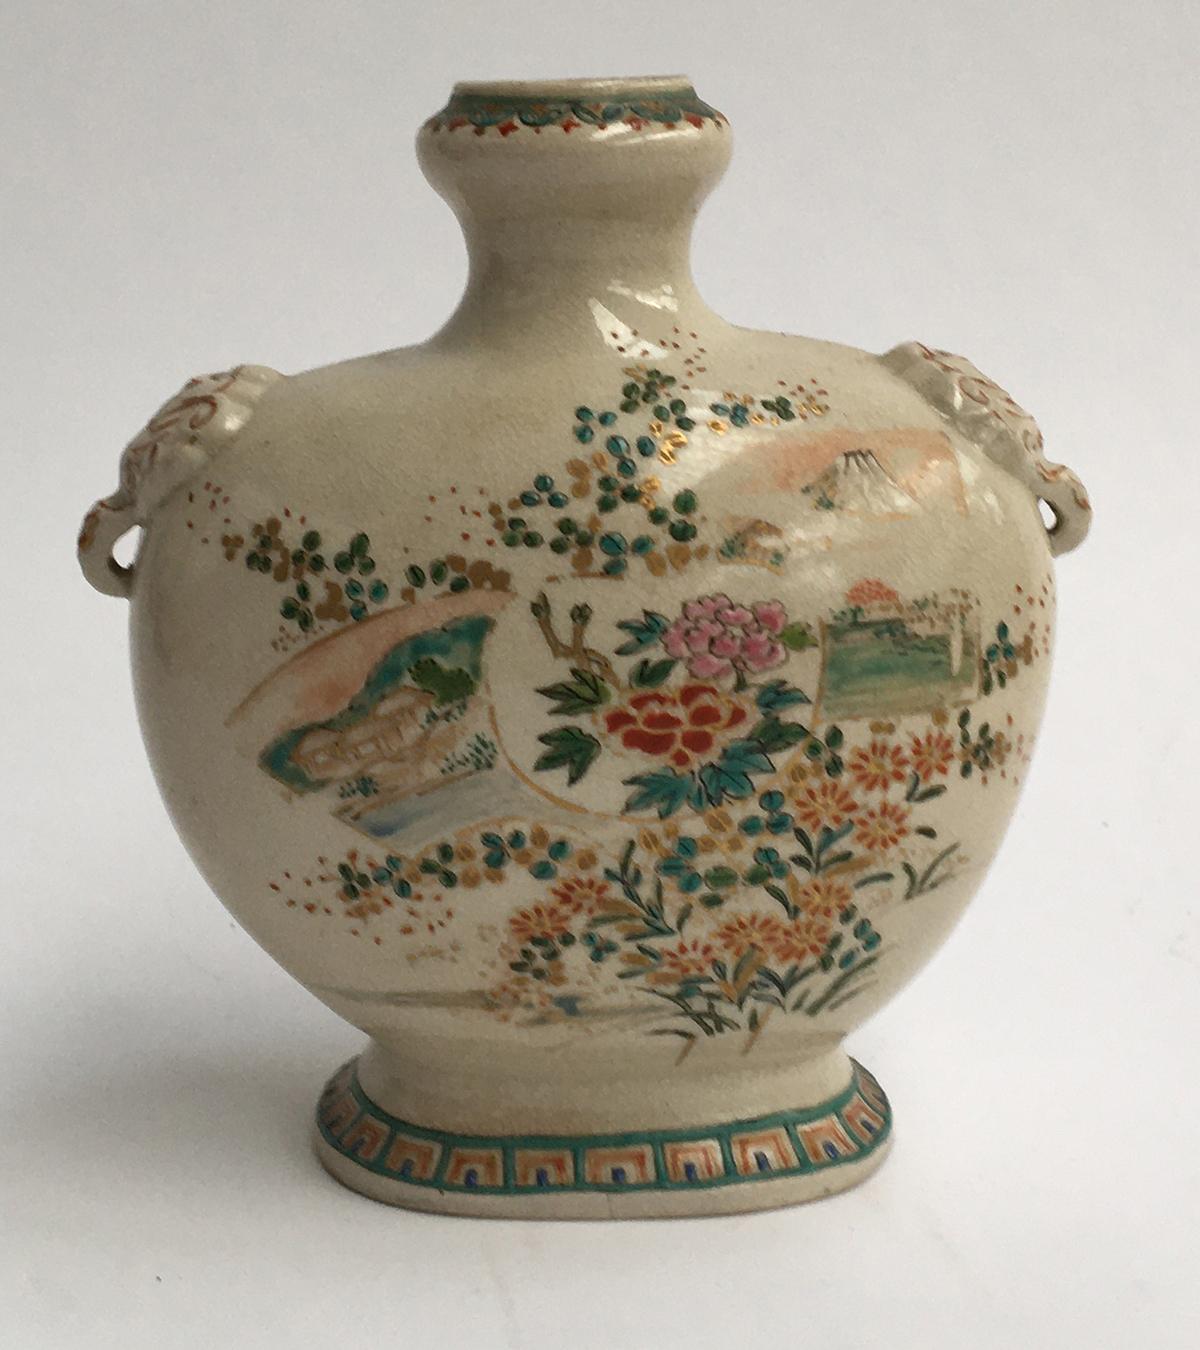 An antique Japanese Meiji period enamelled vase with elephant lugs, decorated with views of Mount